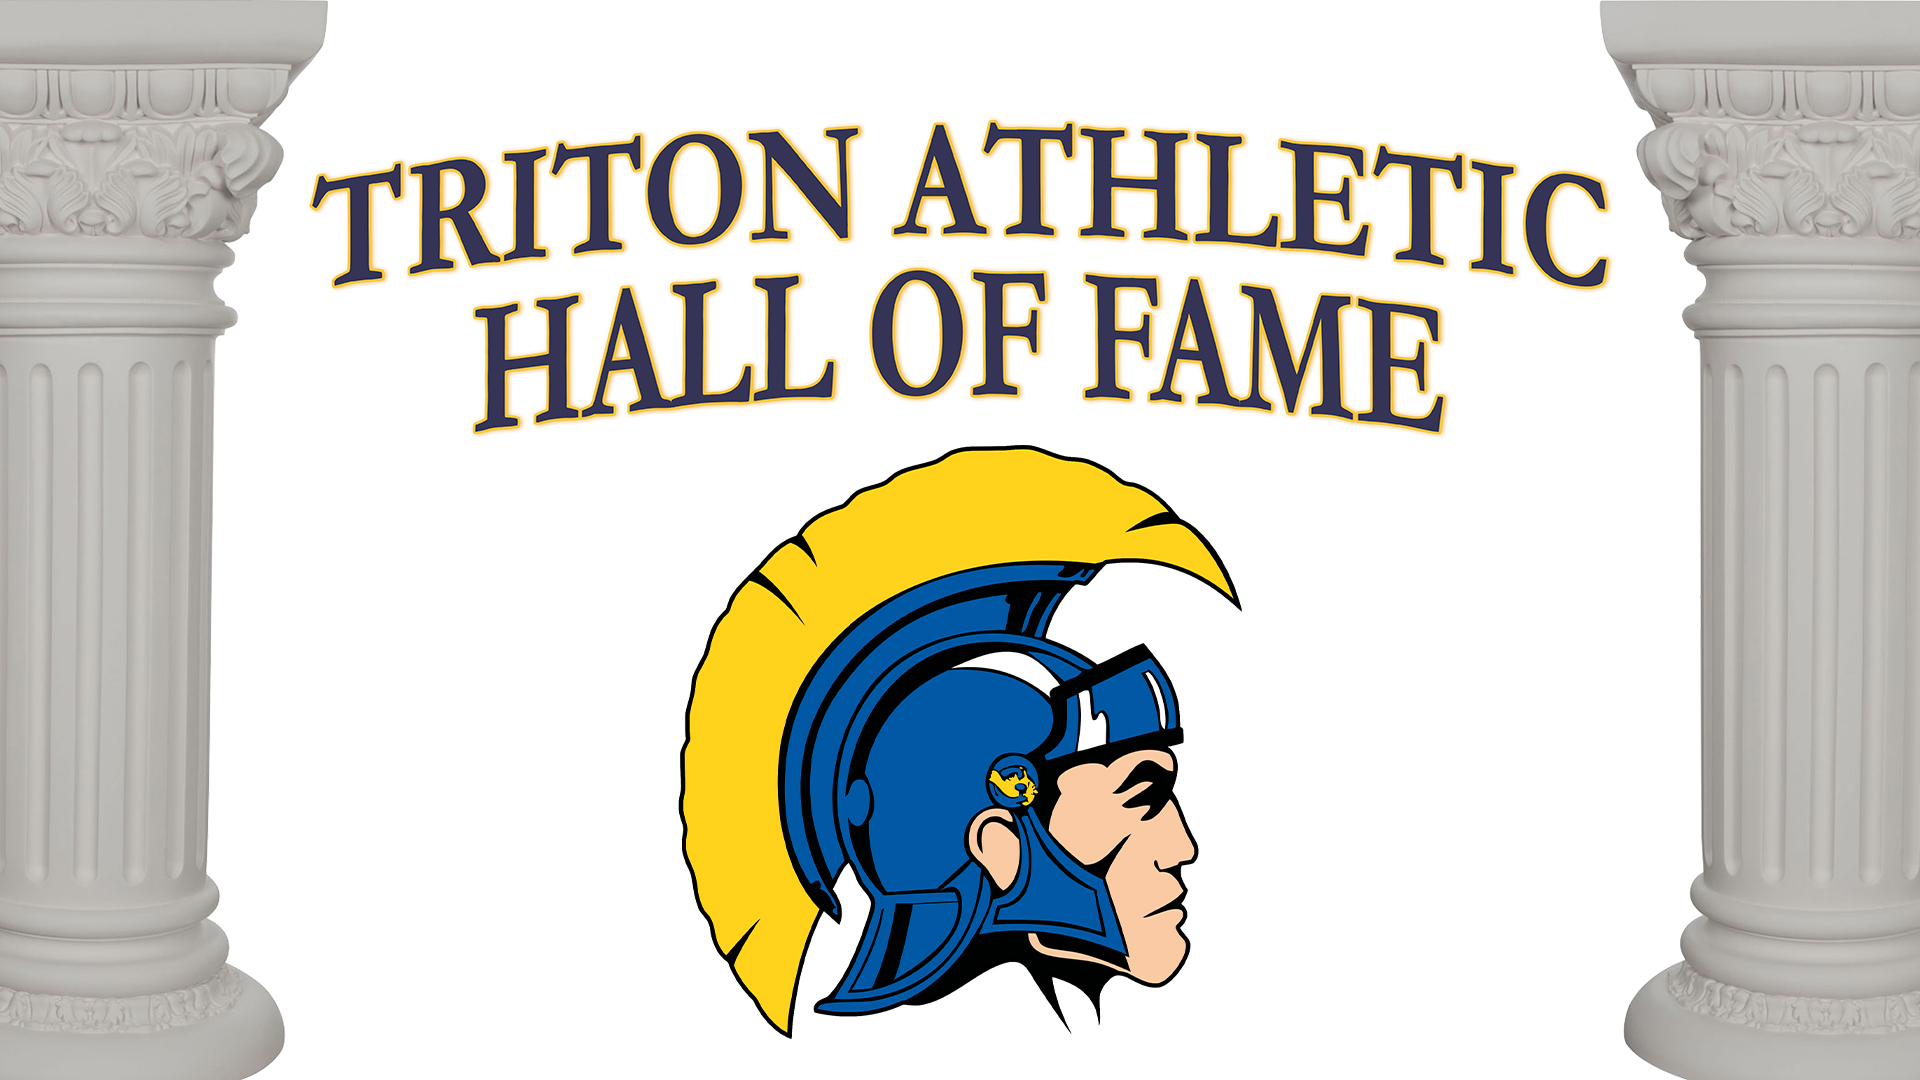 Last Call for Athletic Hall of Fame Banquet Tickets